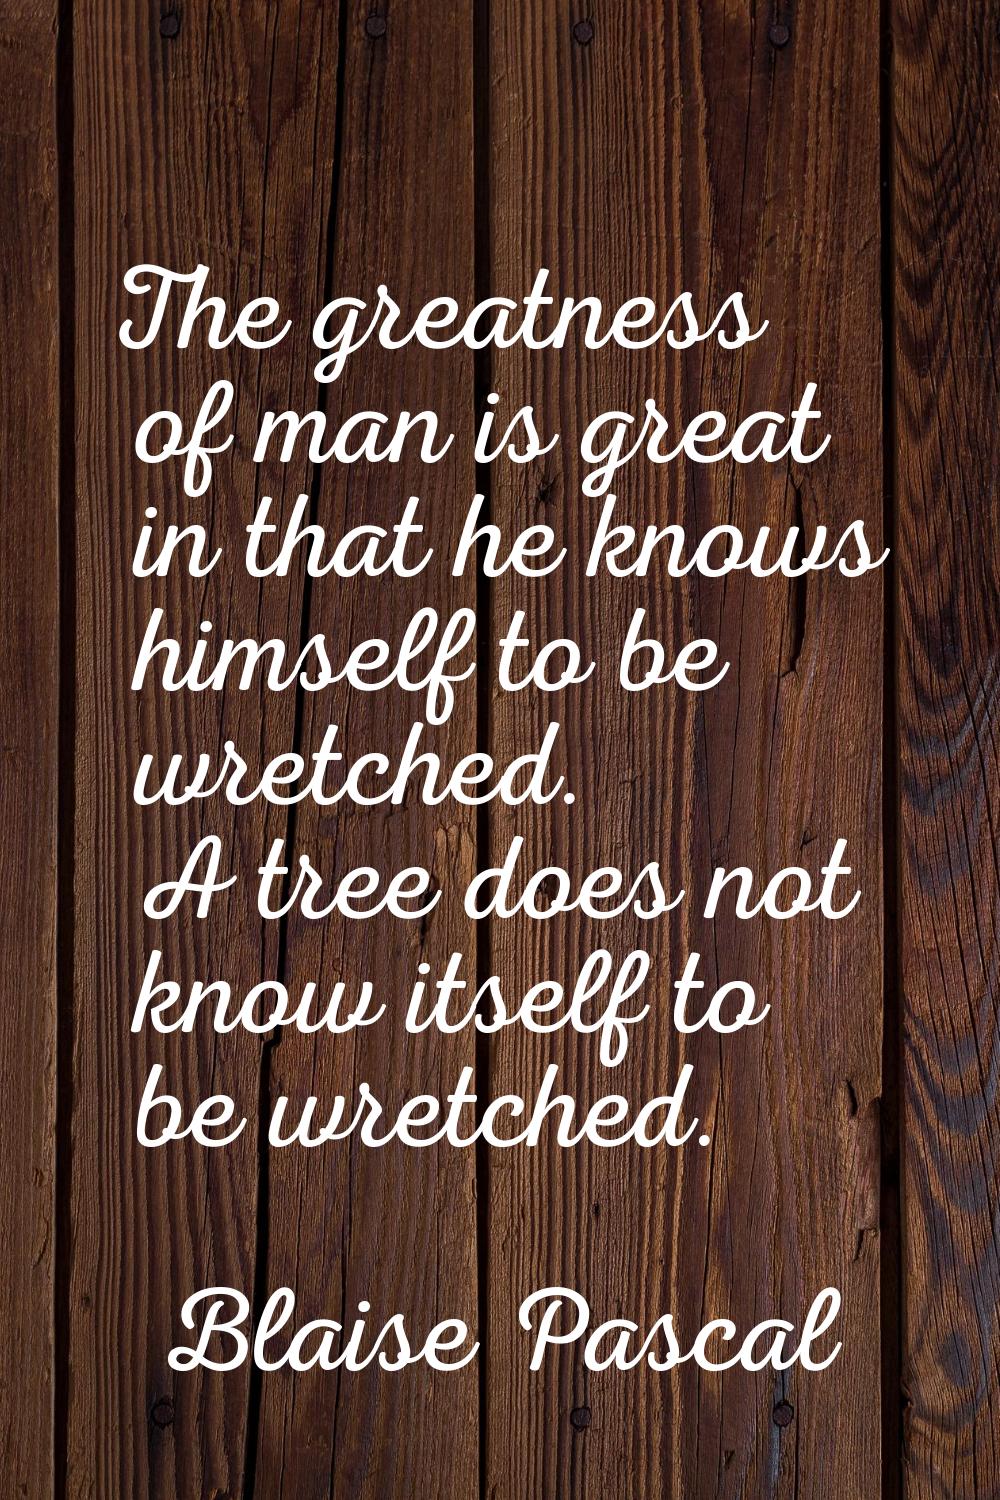 The greatness of man is great in that he knows himself to be wretched. A tree does not know itself 